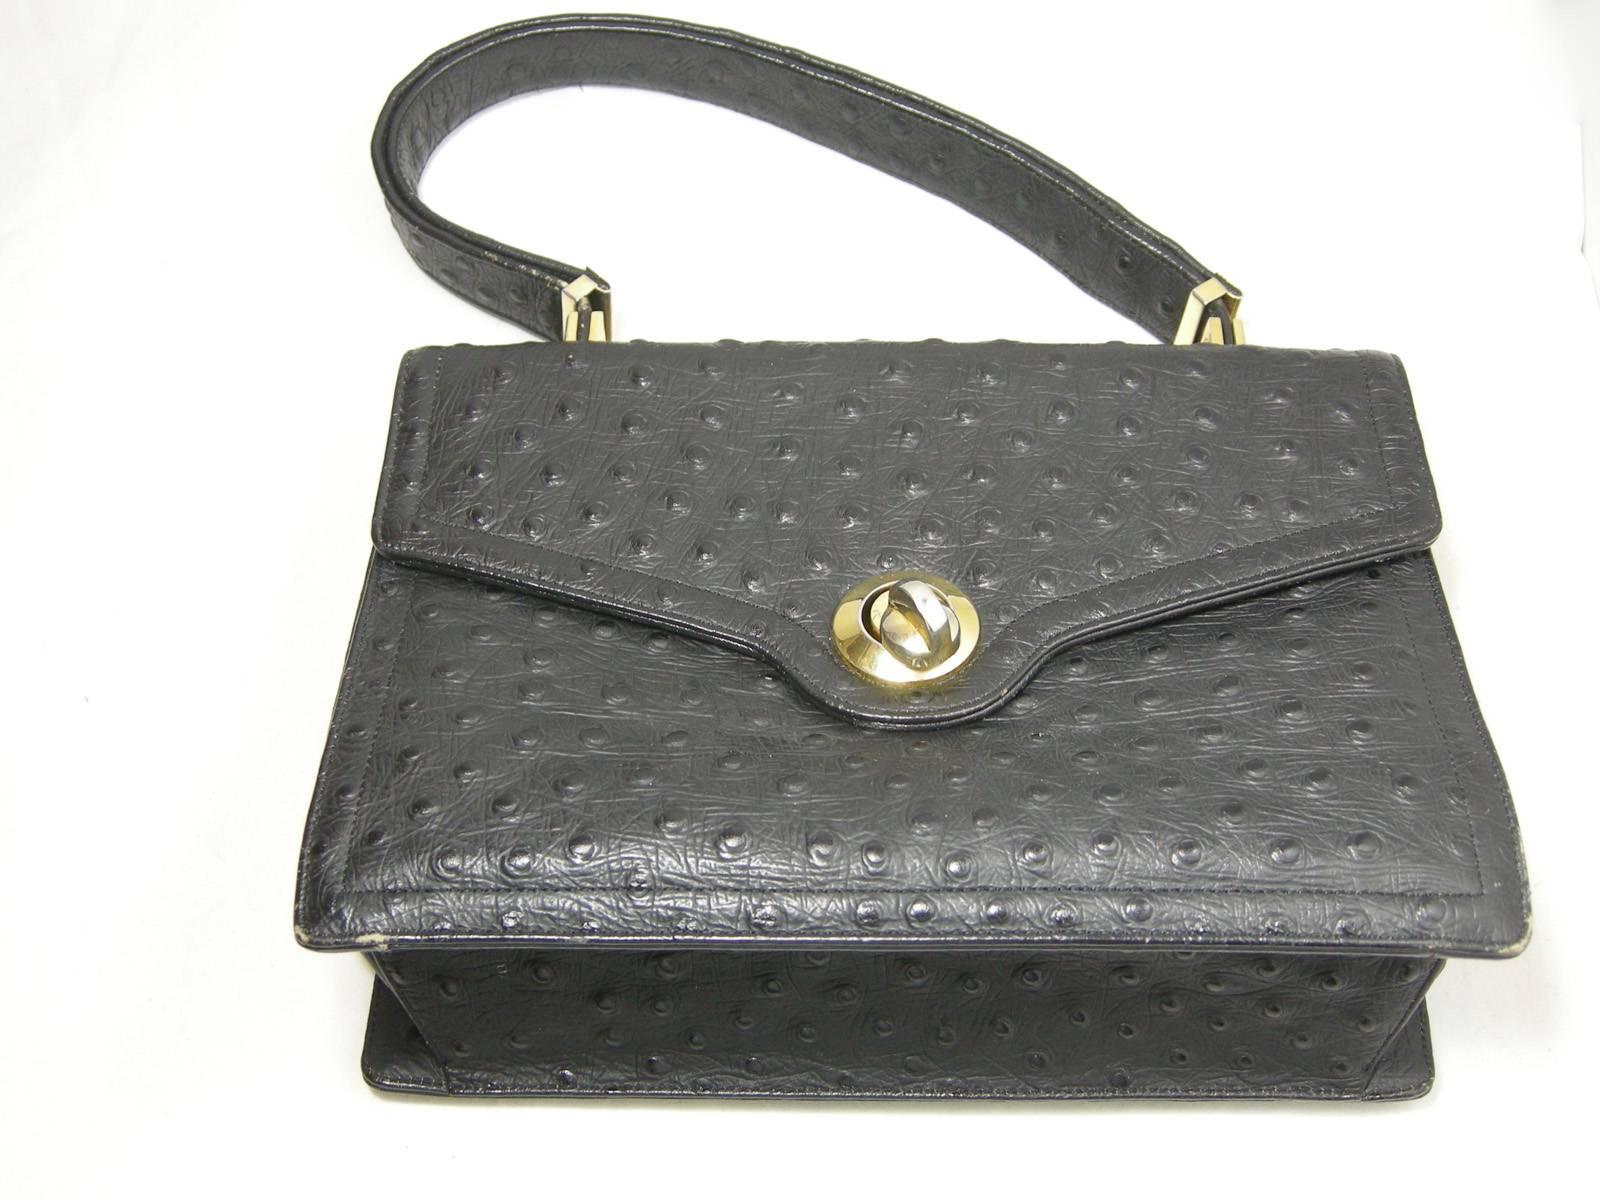 This vintage Koret genuine full quill ostrich black leather handbag has  gold tone hardware and it opens with an easy twist. The inside is made of  beautiful black leather with the original  black coin purse. The bag has a zipper compartment across